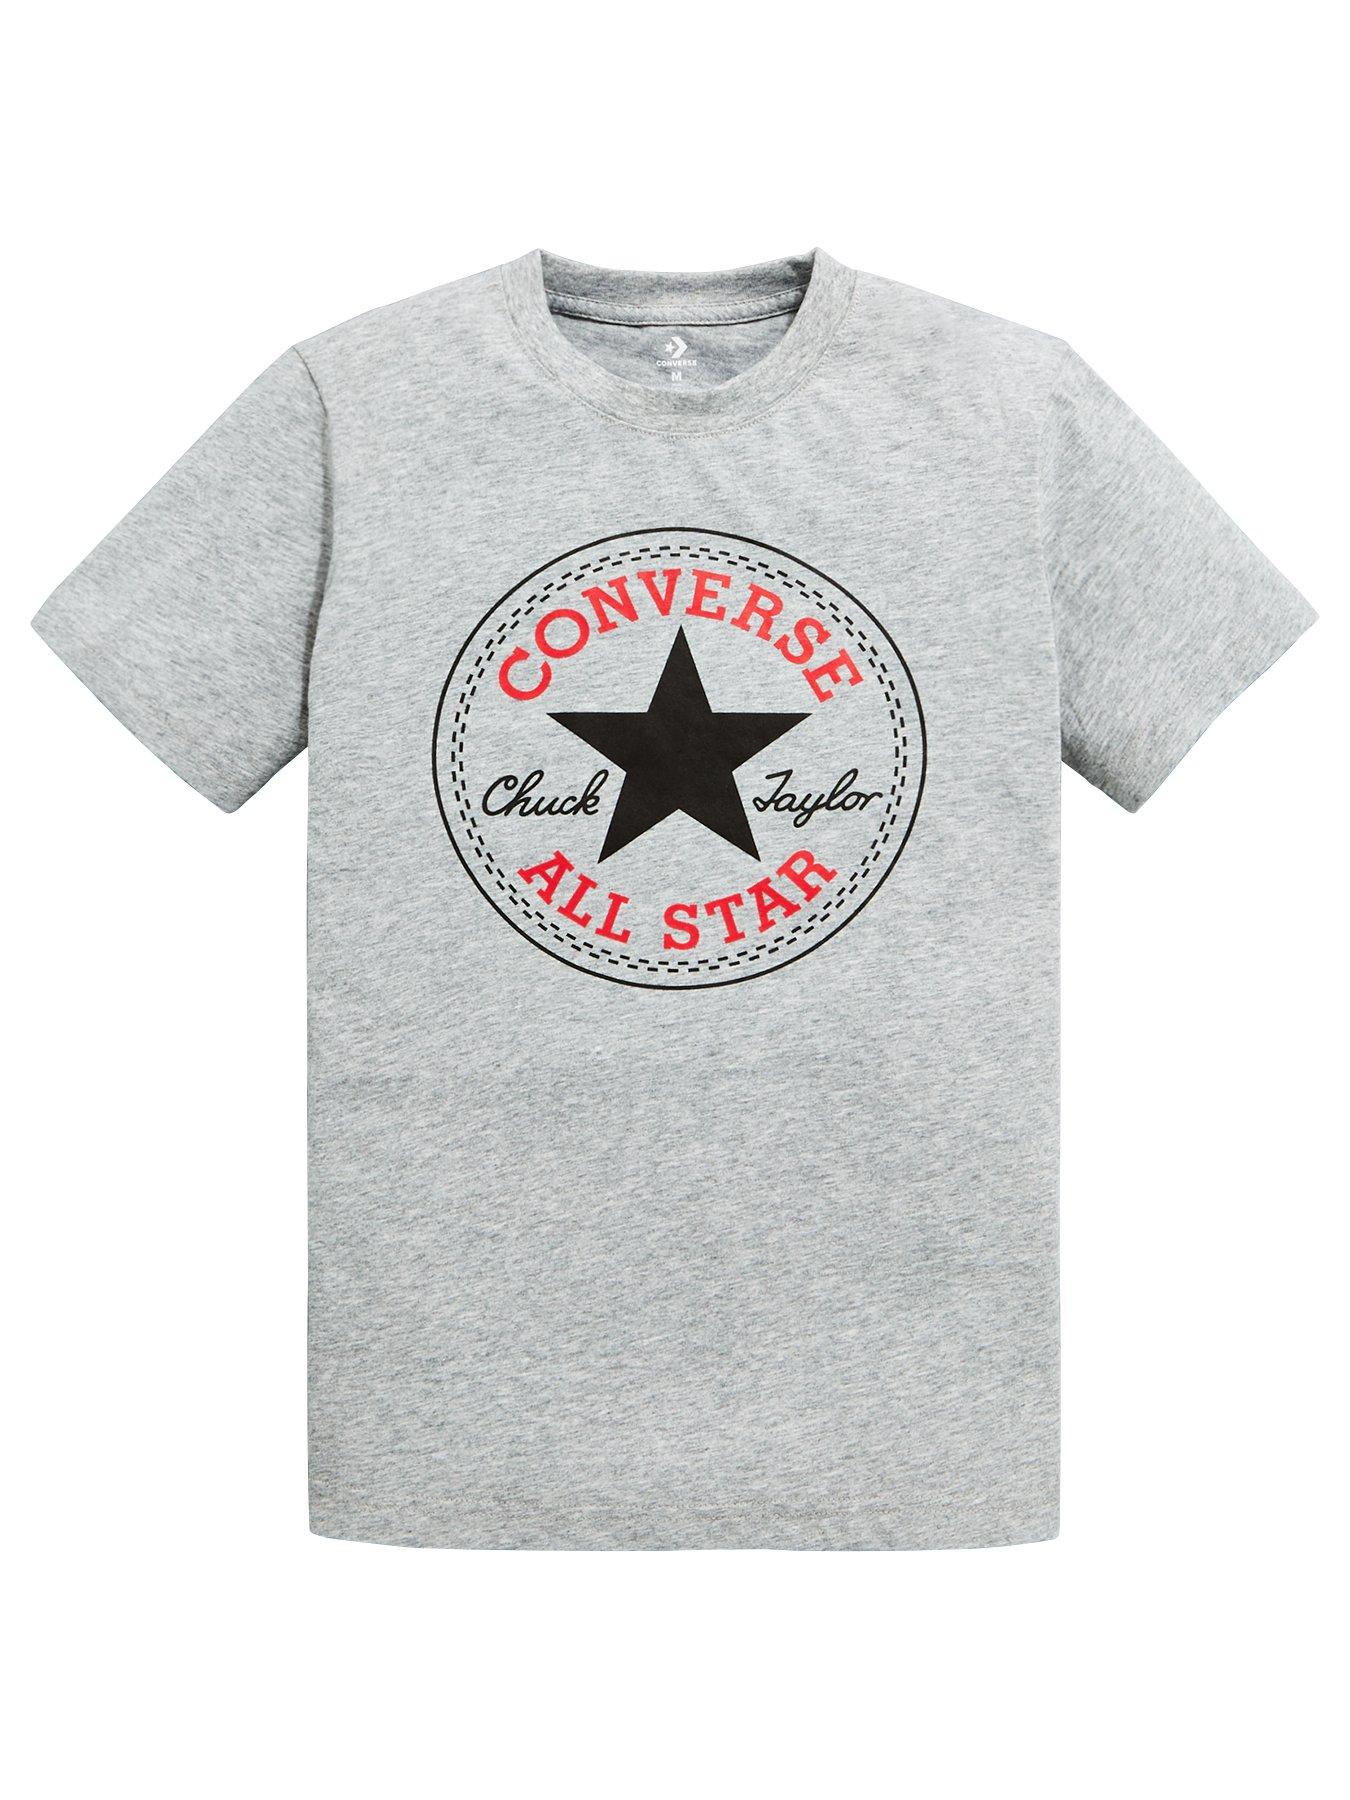 converse uk baby clothes